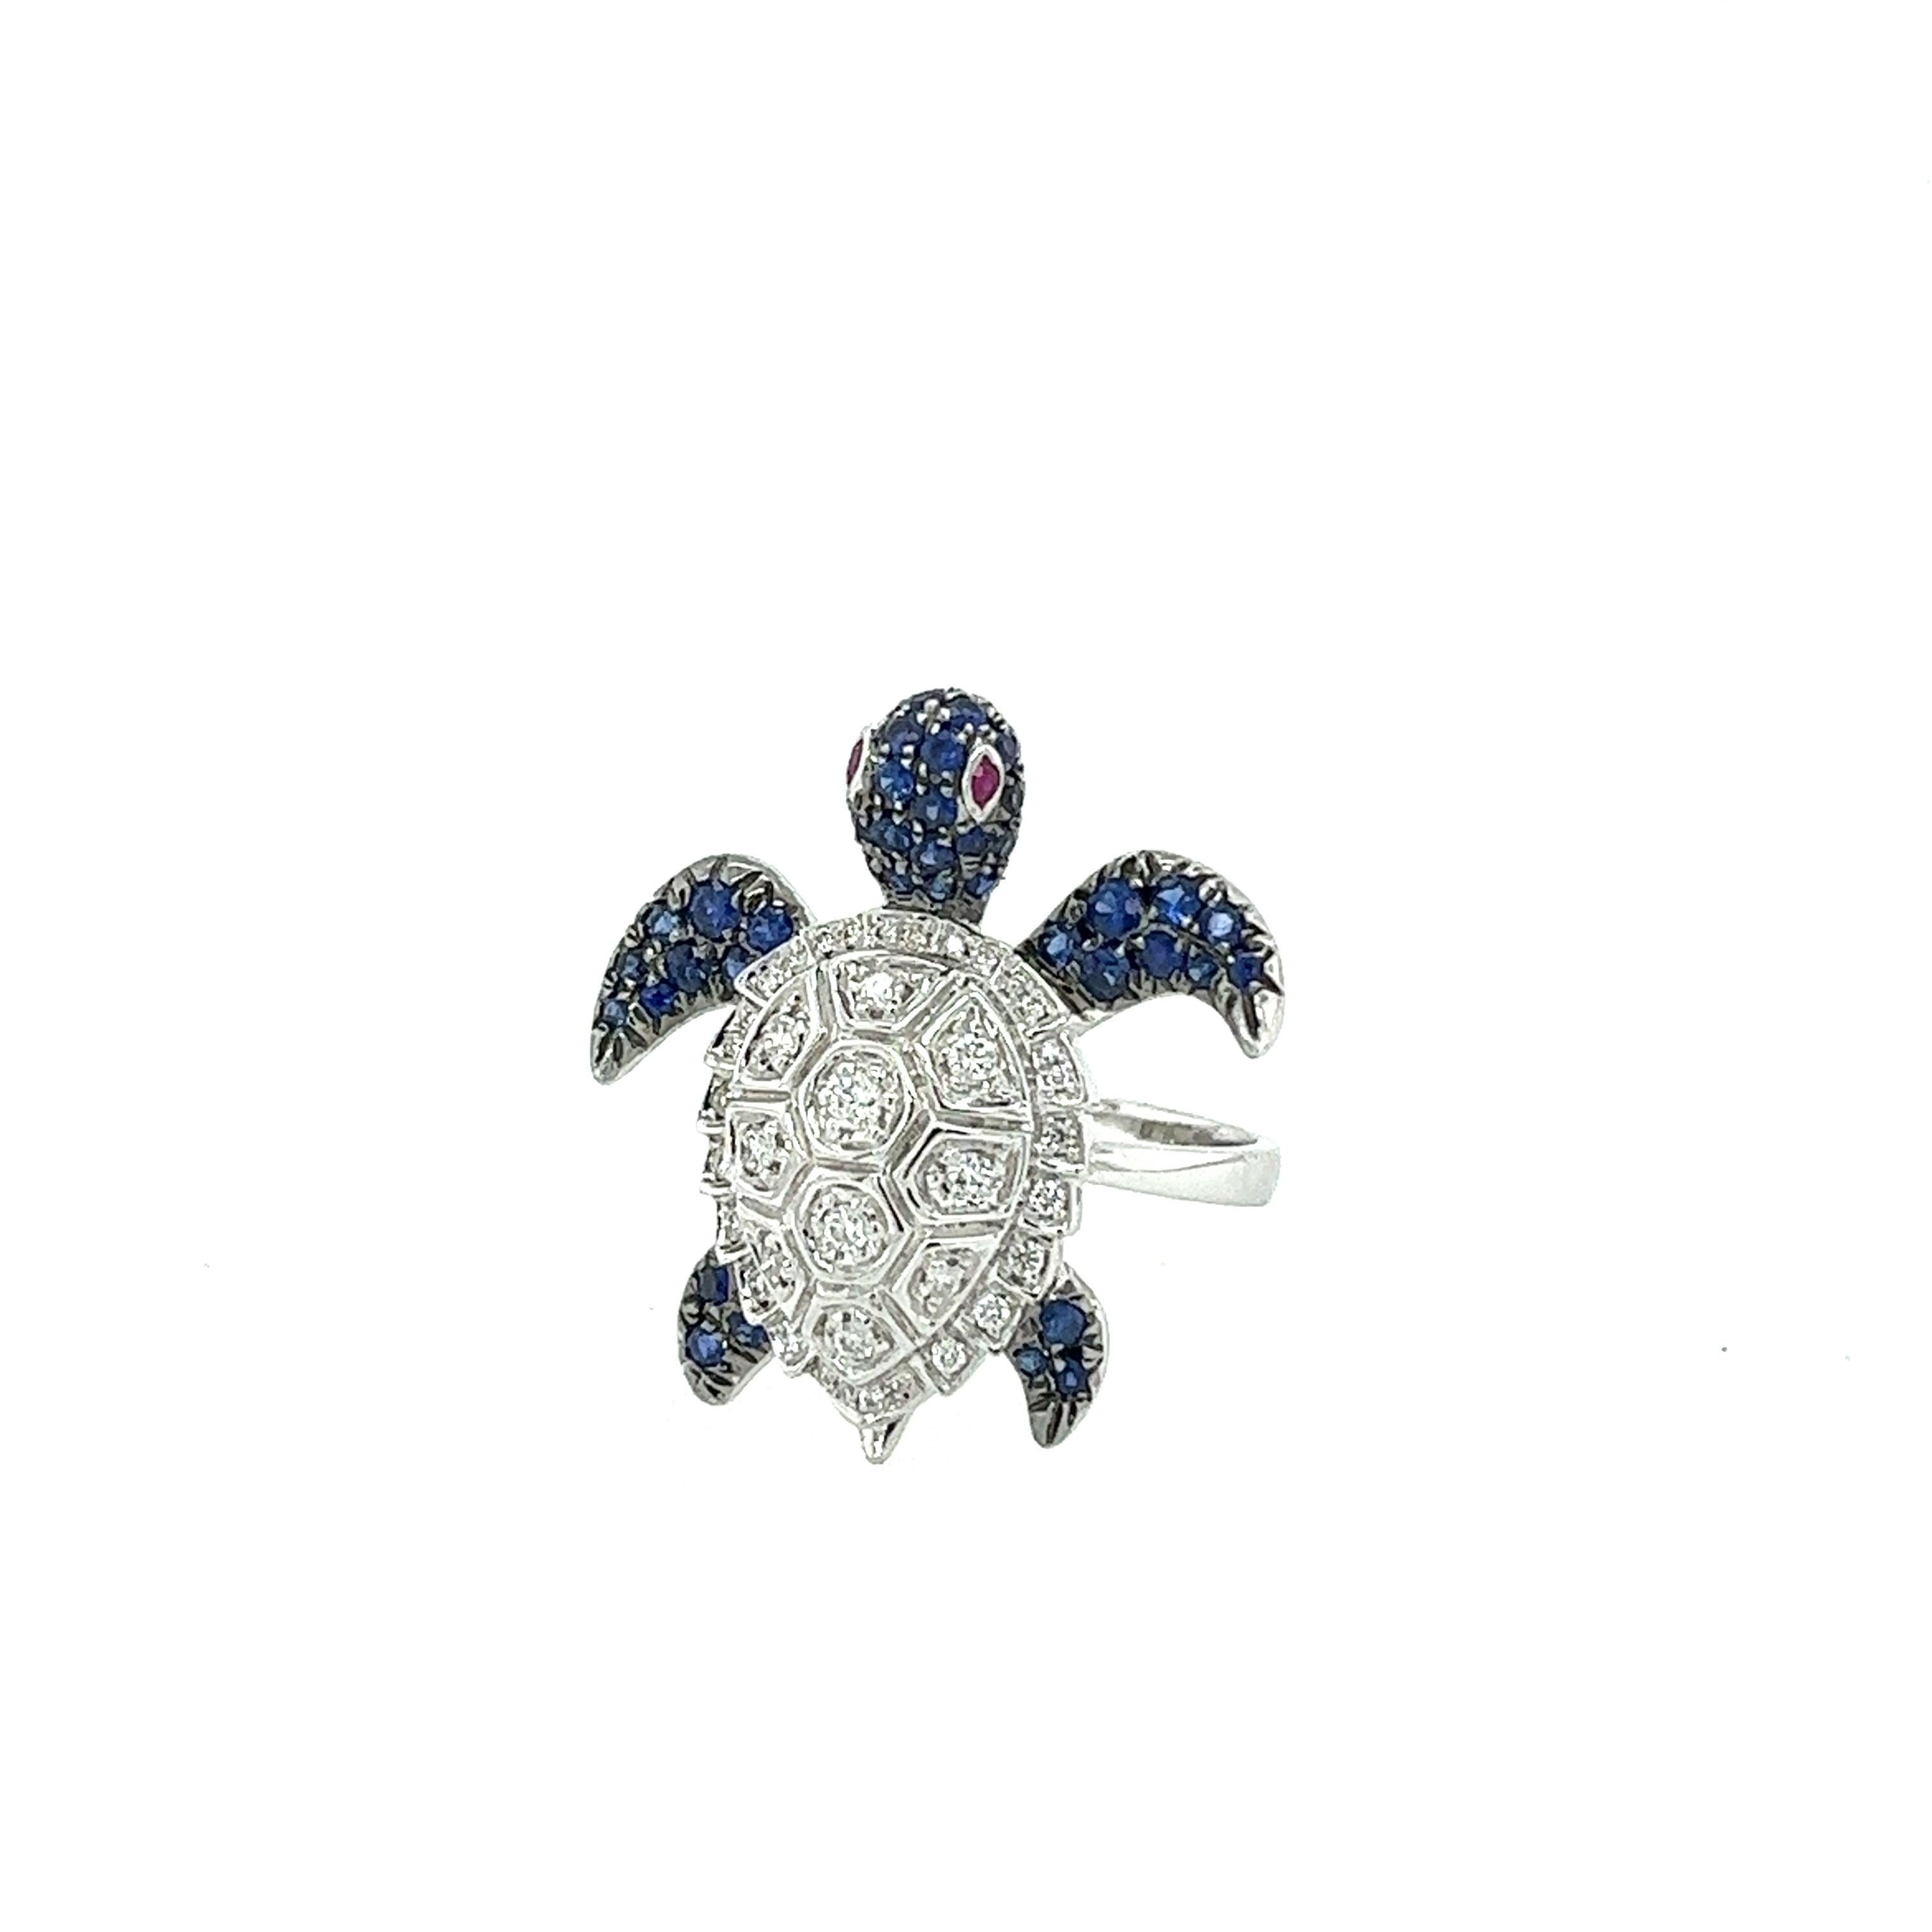 18K White Gold Blue Sapphire Turtle Ring with Diamonds

42 Blue Sapphires - 0.63 CT
38 Diamonds - 0.26 CT
2 Rubies - 0.02 CT
18K White Gold - 6.48 GM

Turtle represents intuitive development, protection, wisdom, patience, and determination. As a